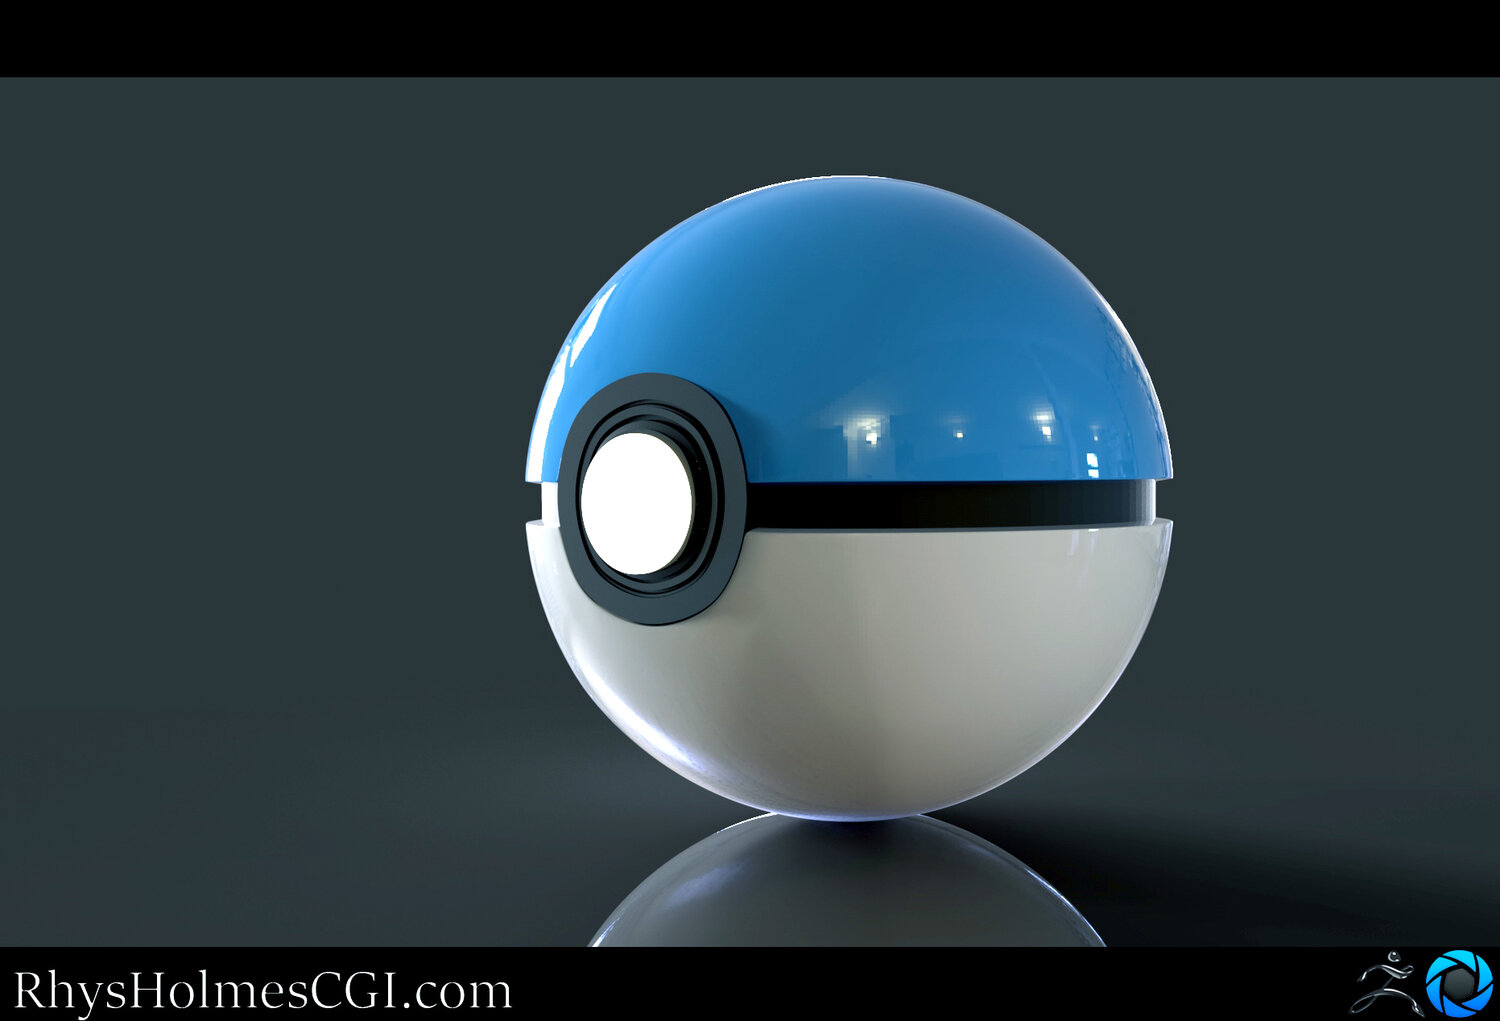 Poke+ball+render_4_lights+on_Blue+.3_With+new+template.jpg